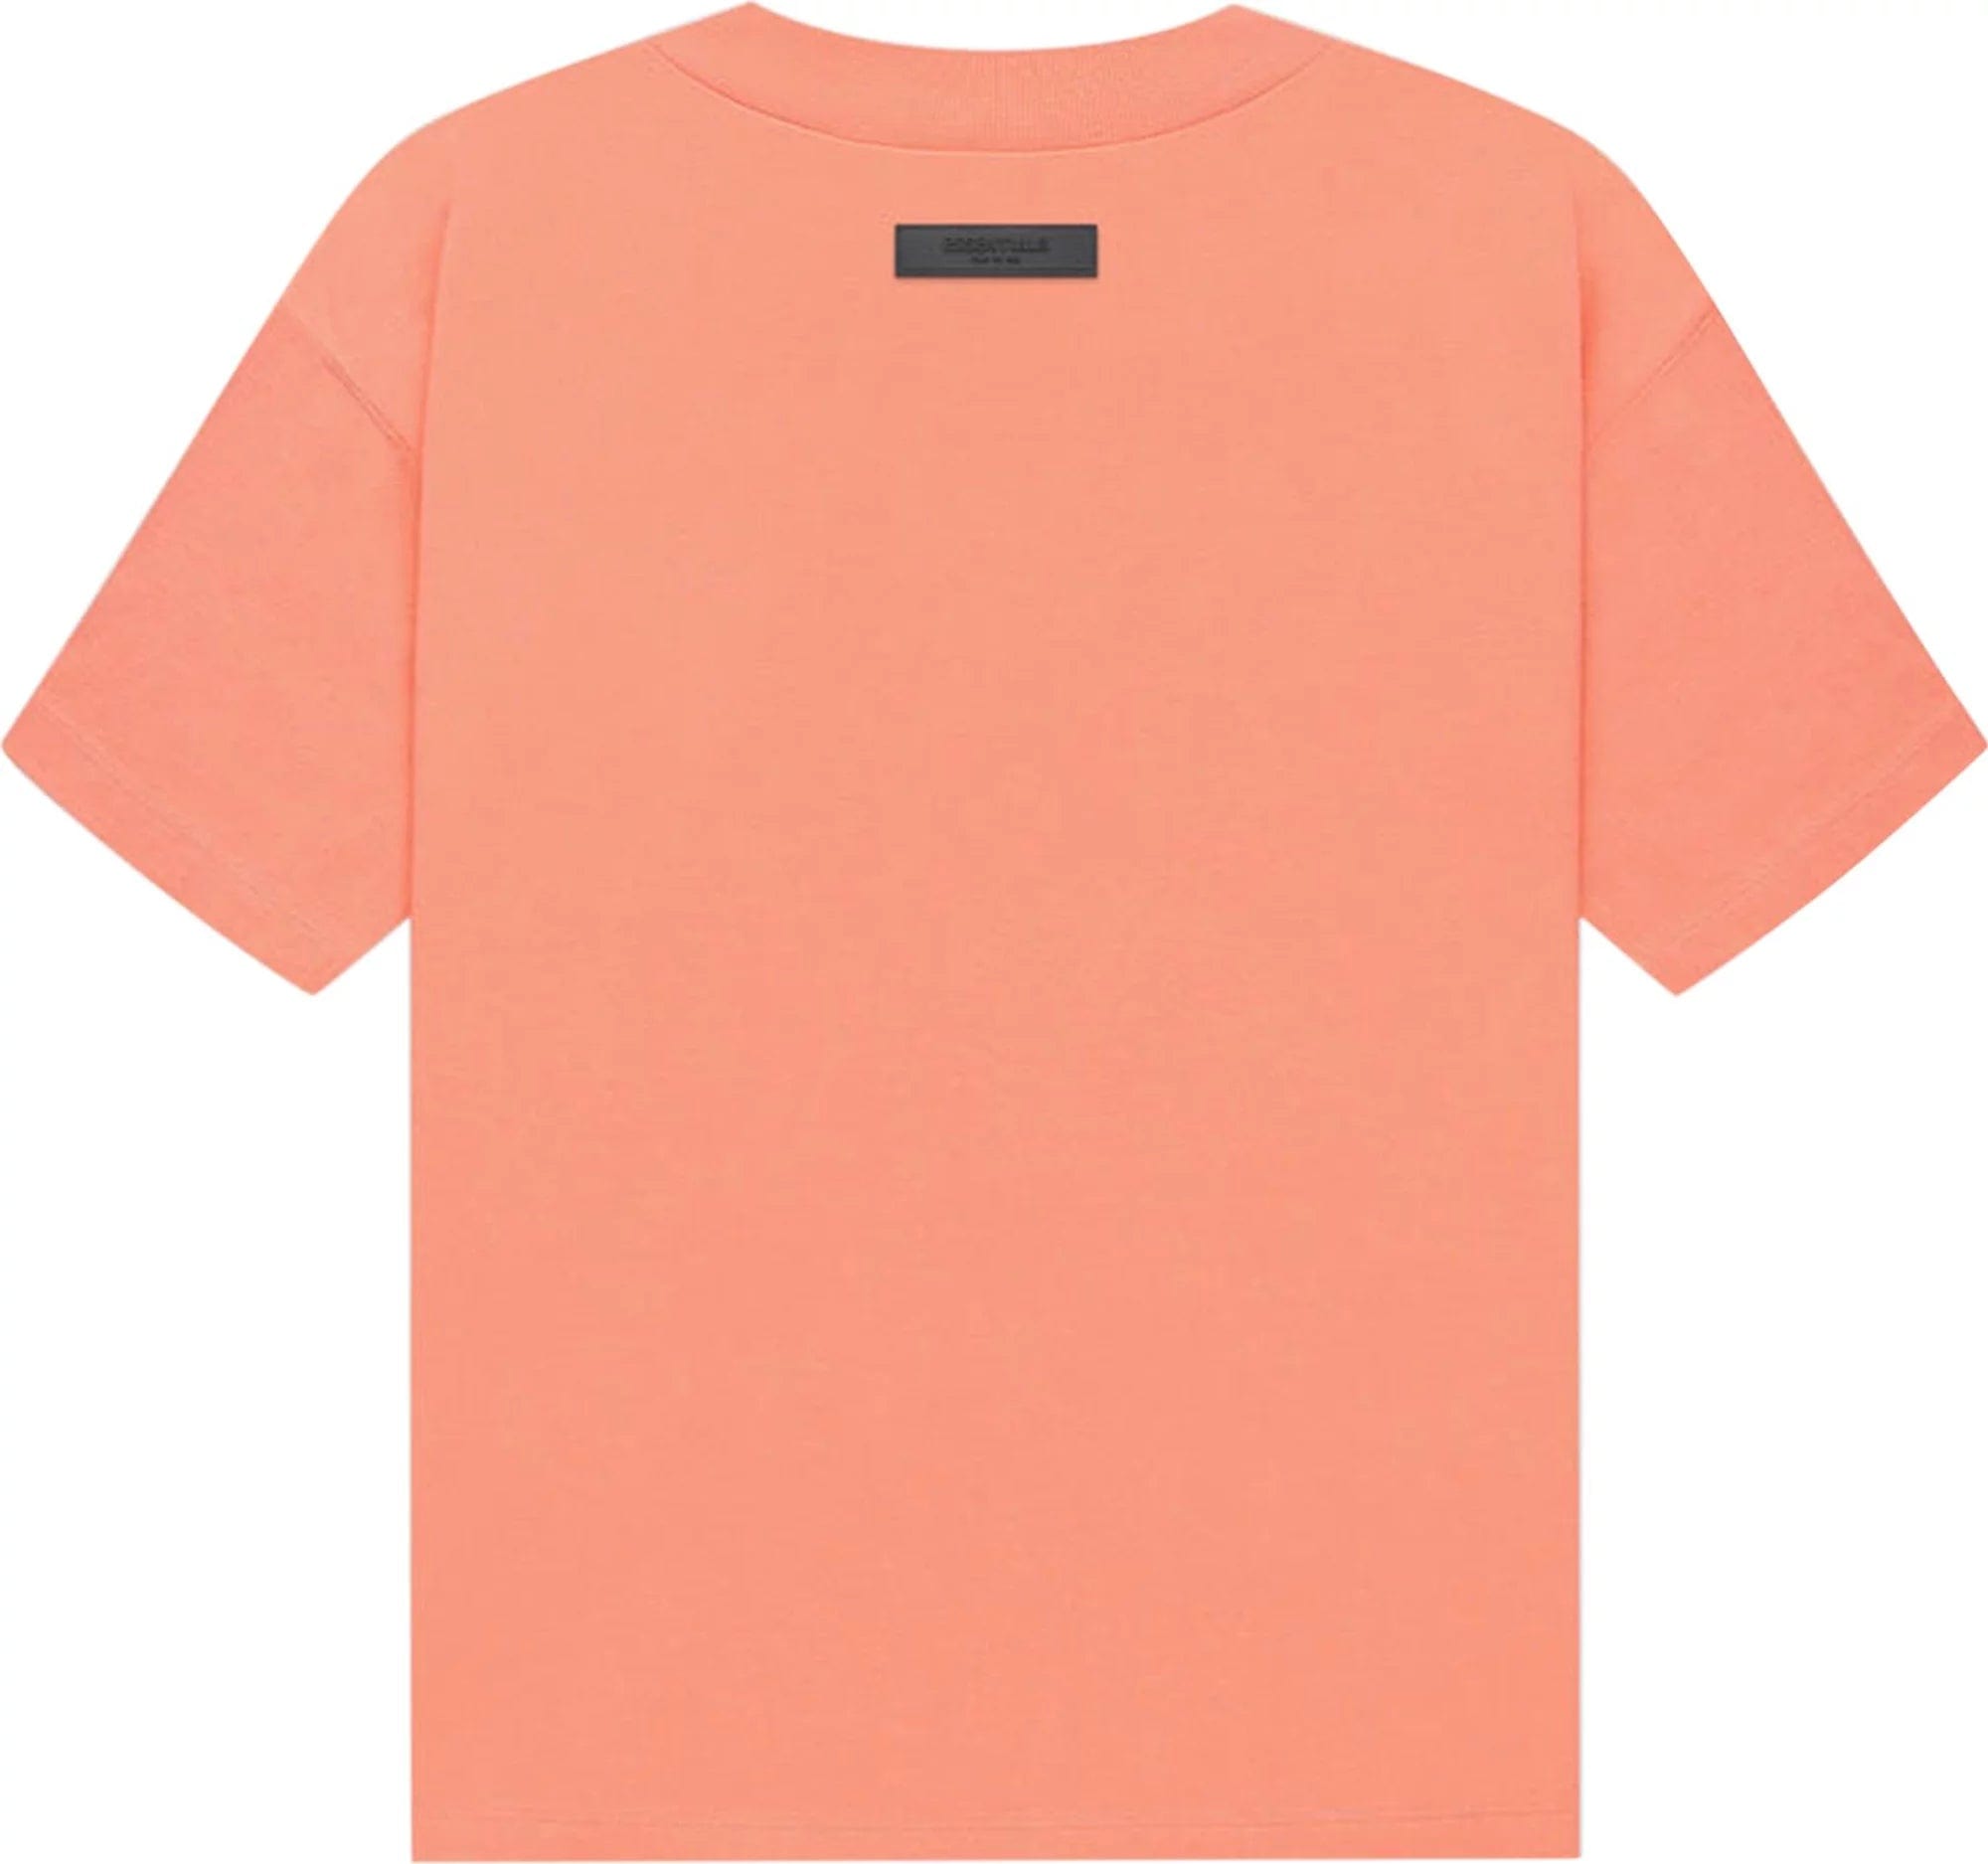 Fear of God Essentials Short-Sleeve Tee Coral